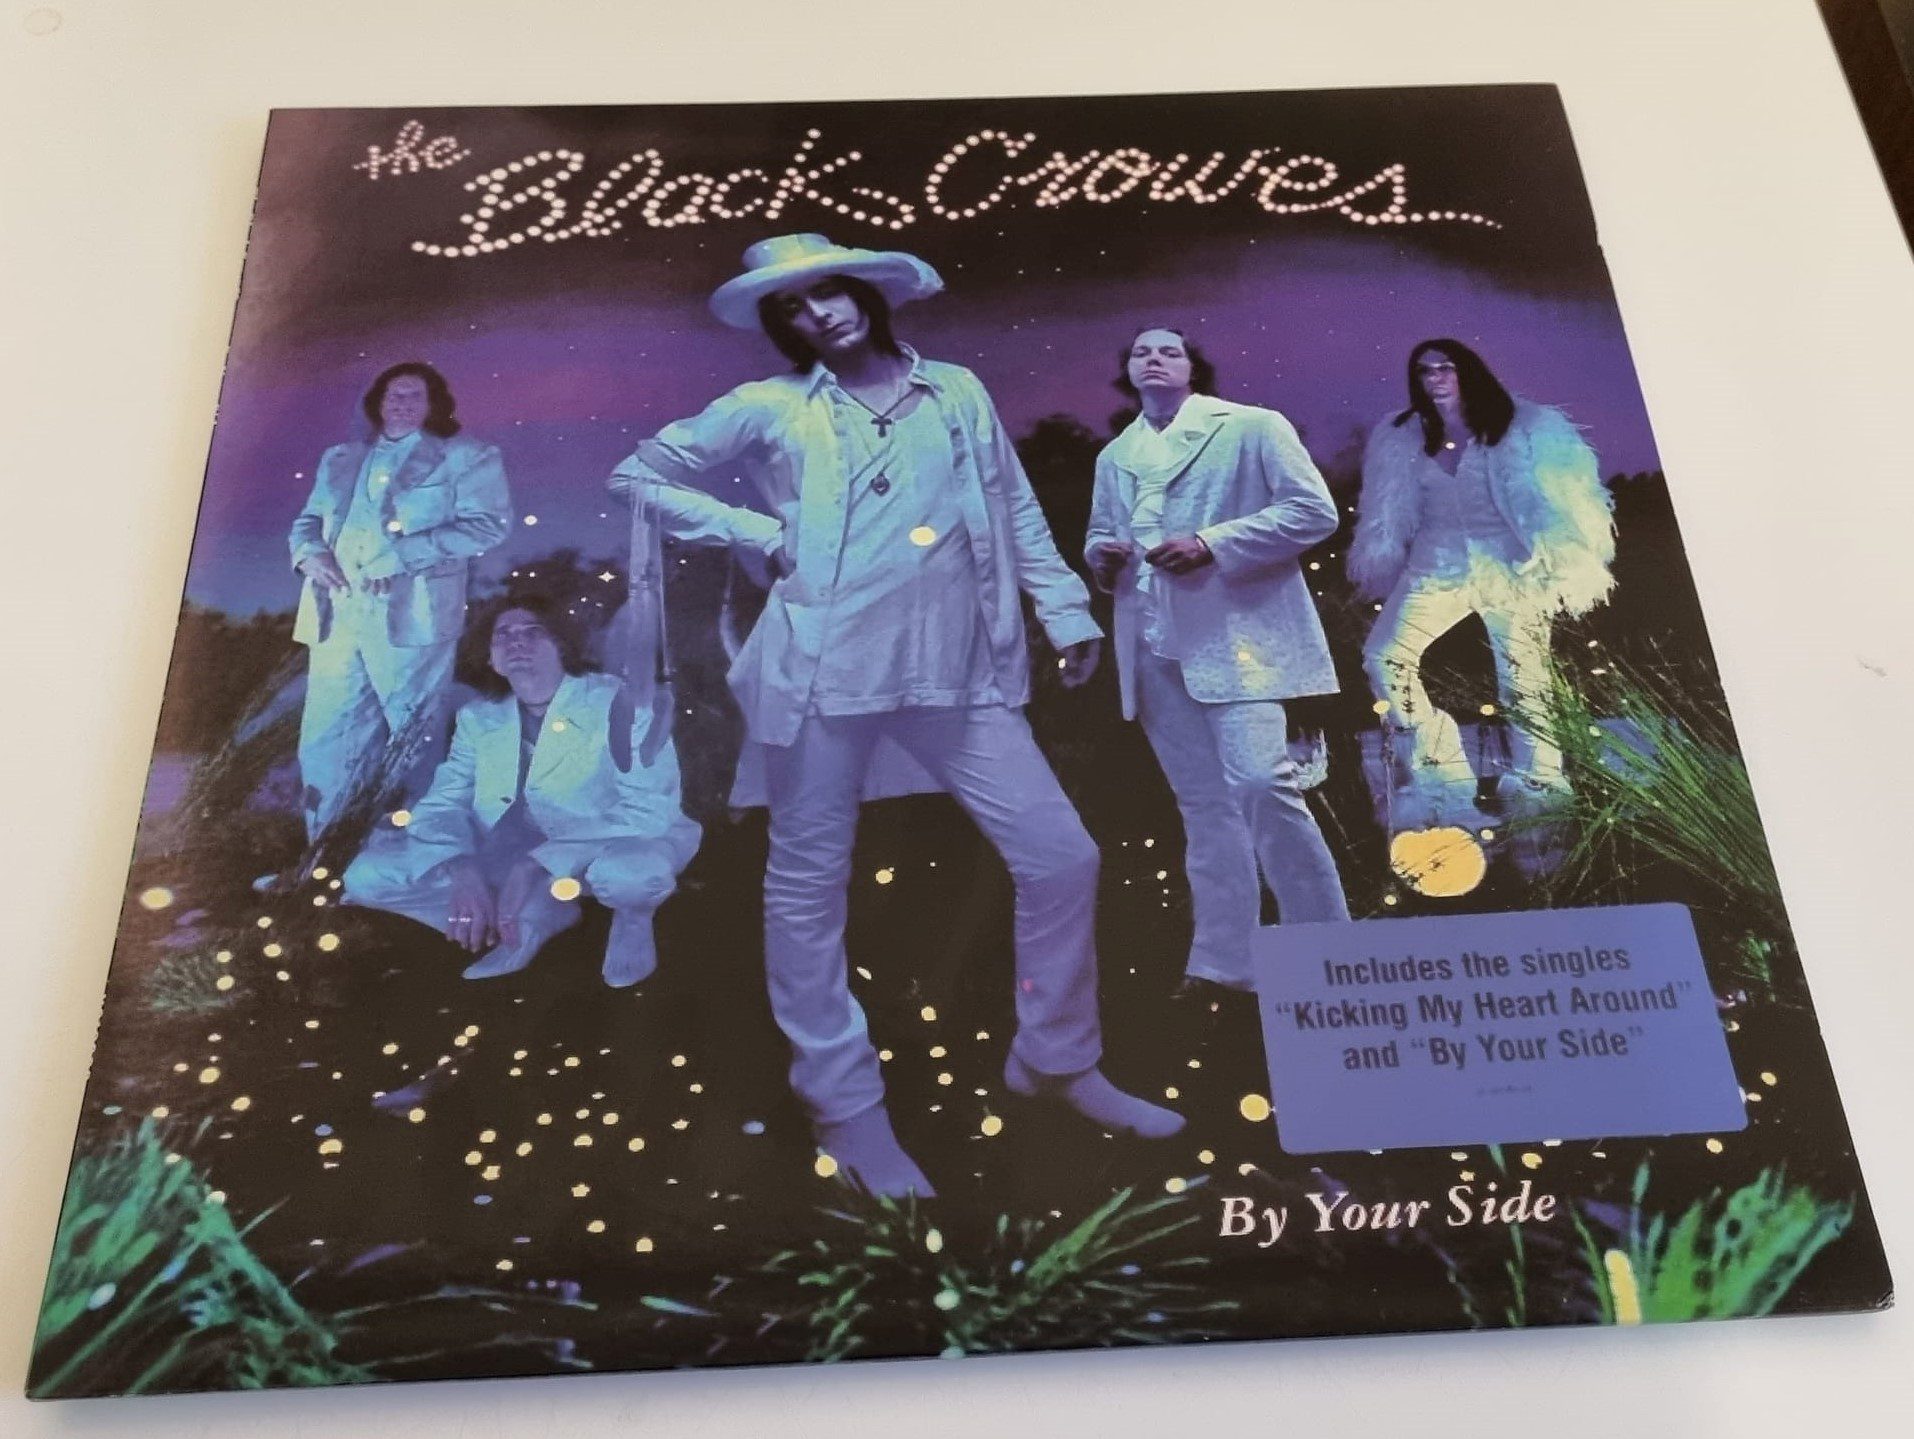 Buy this rare Black Crowes record by clicking here